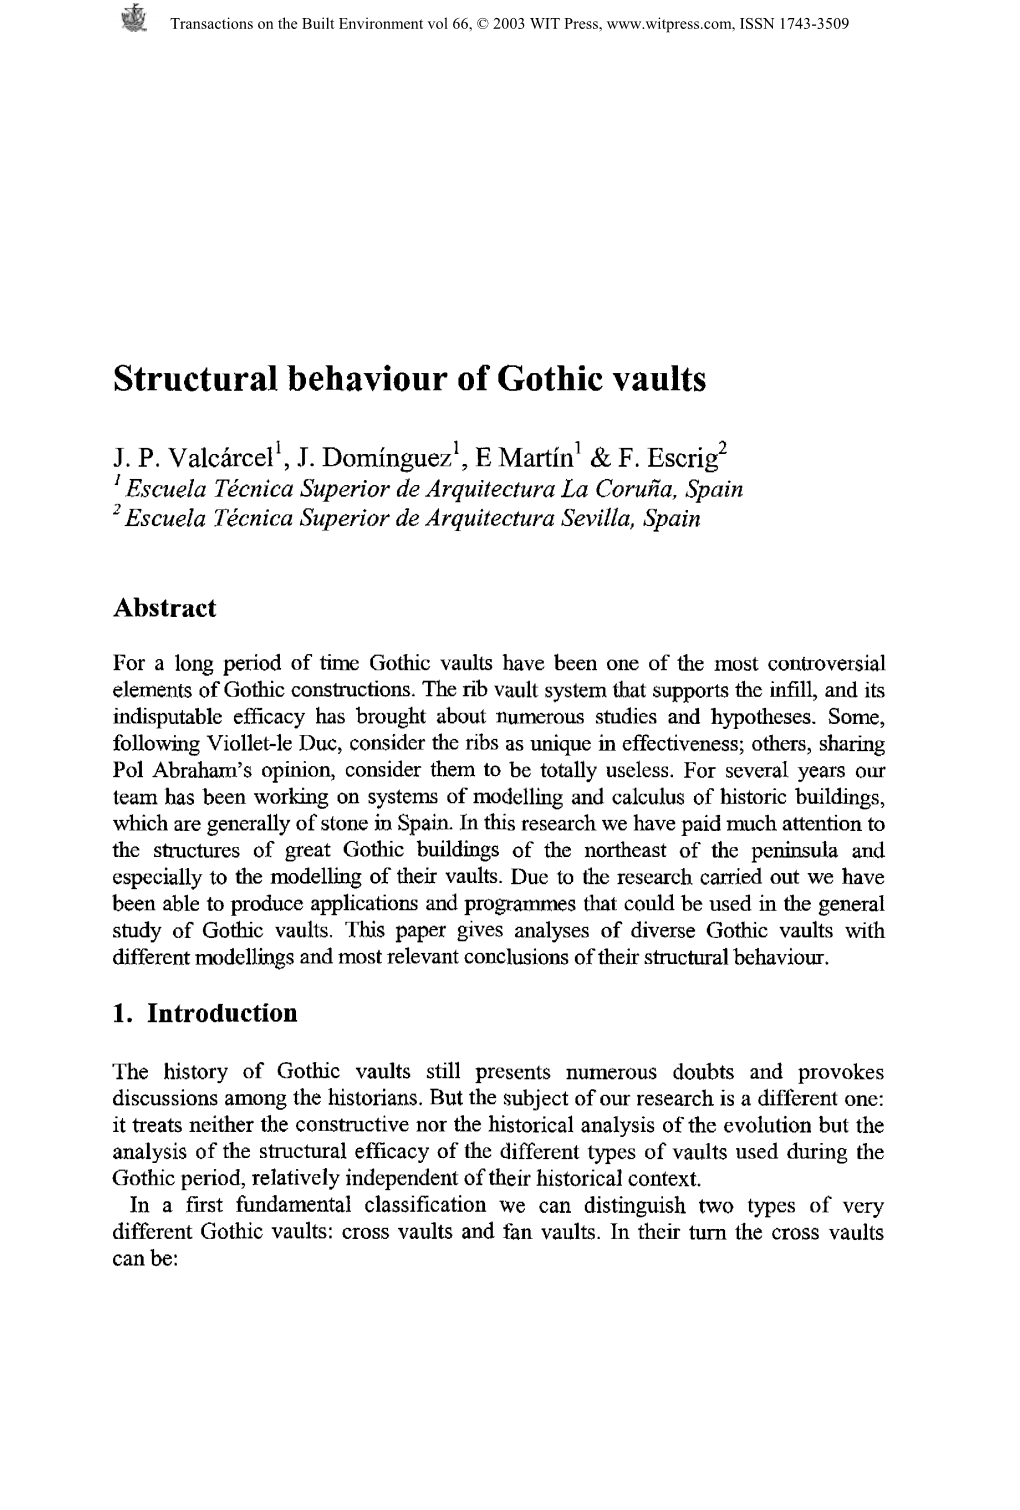 Structural Behaviour of Gothic Vaults